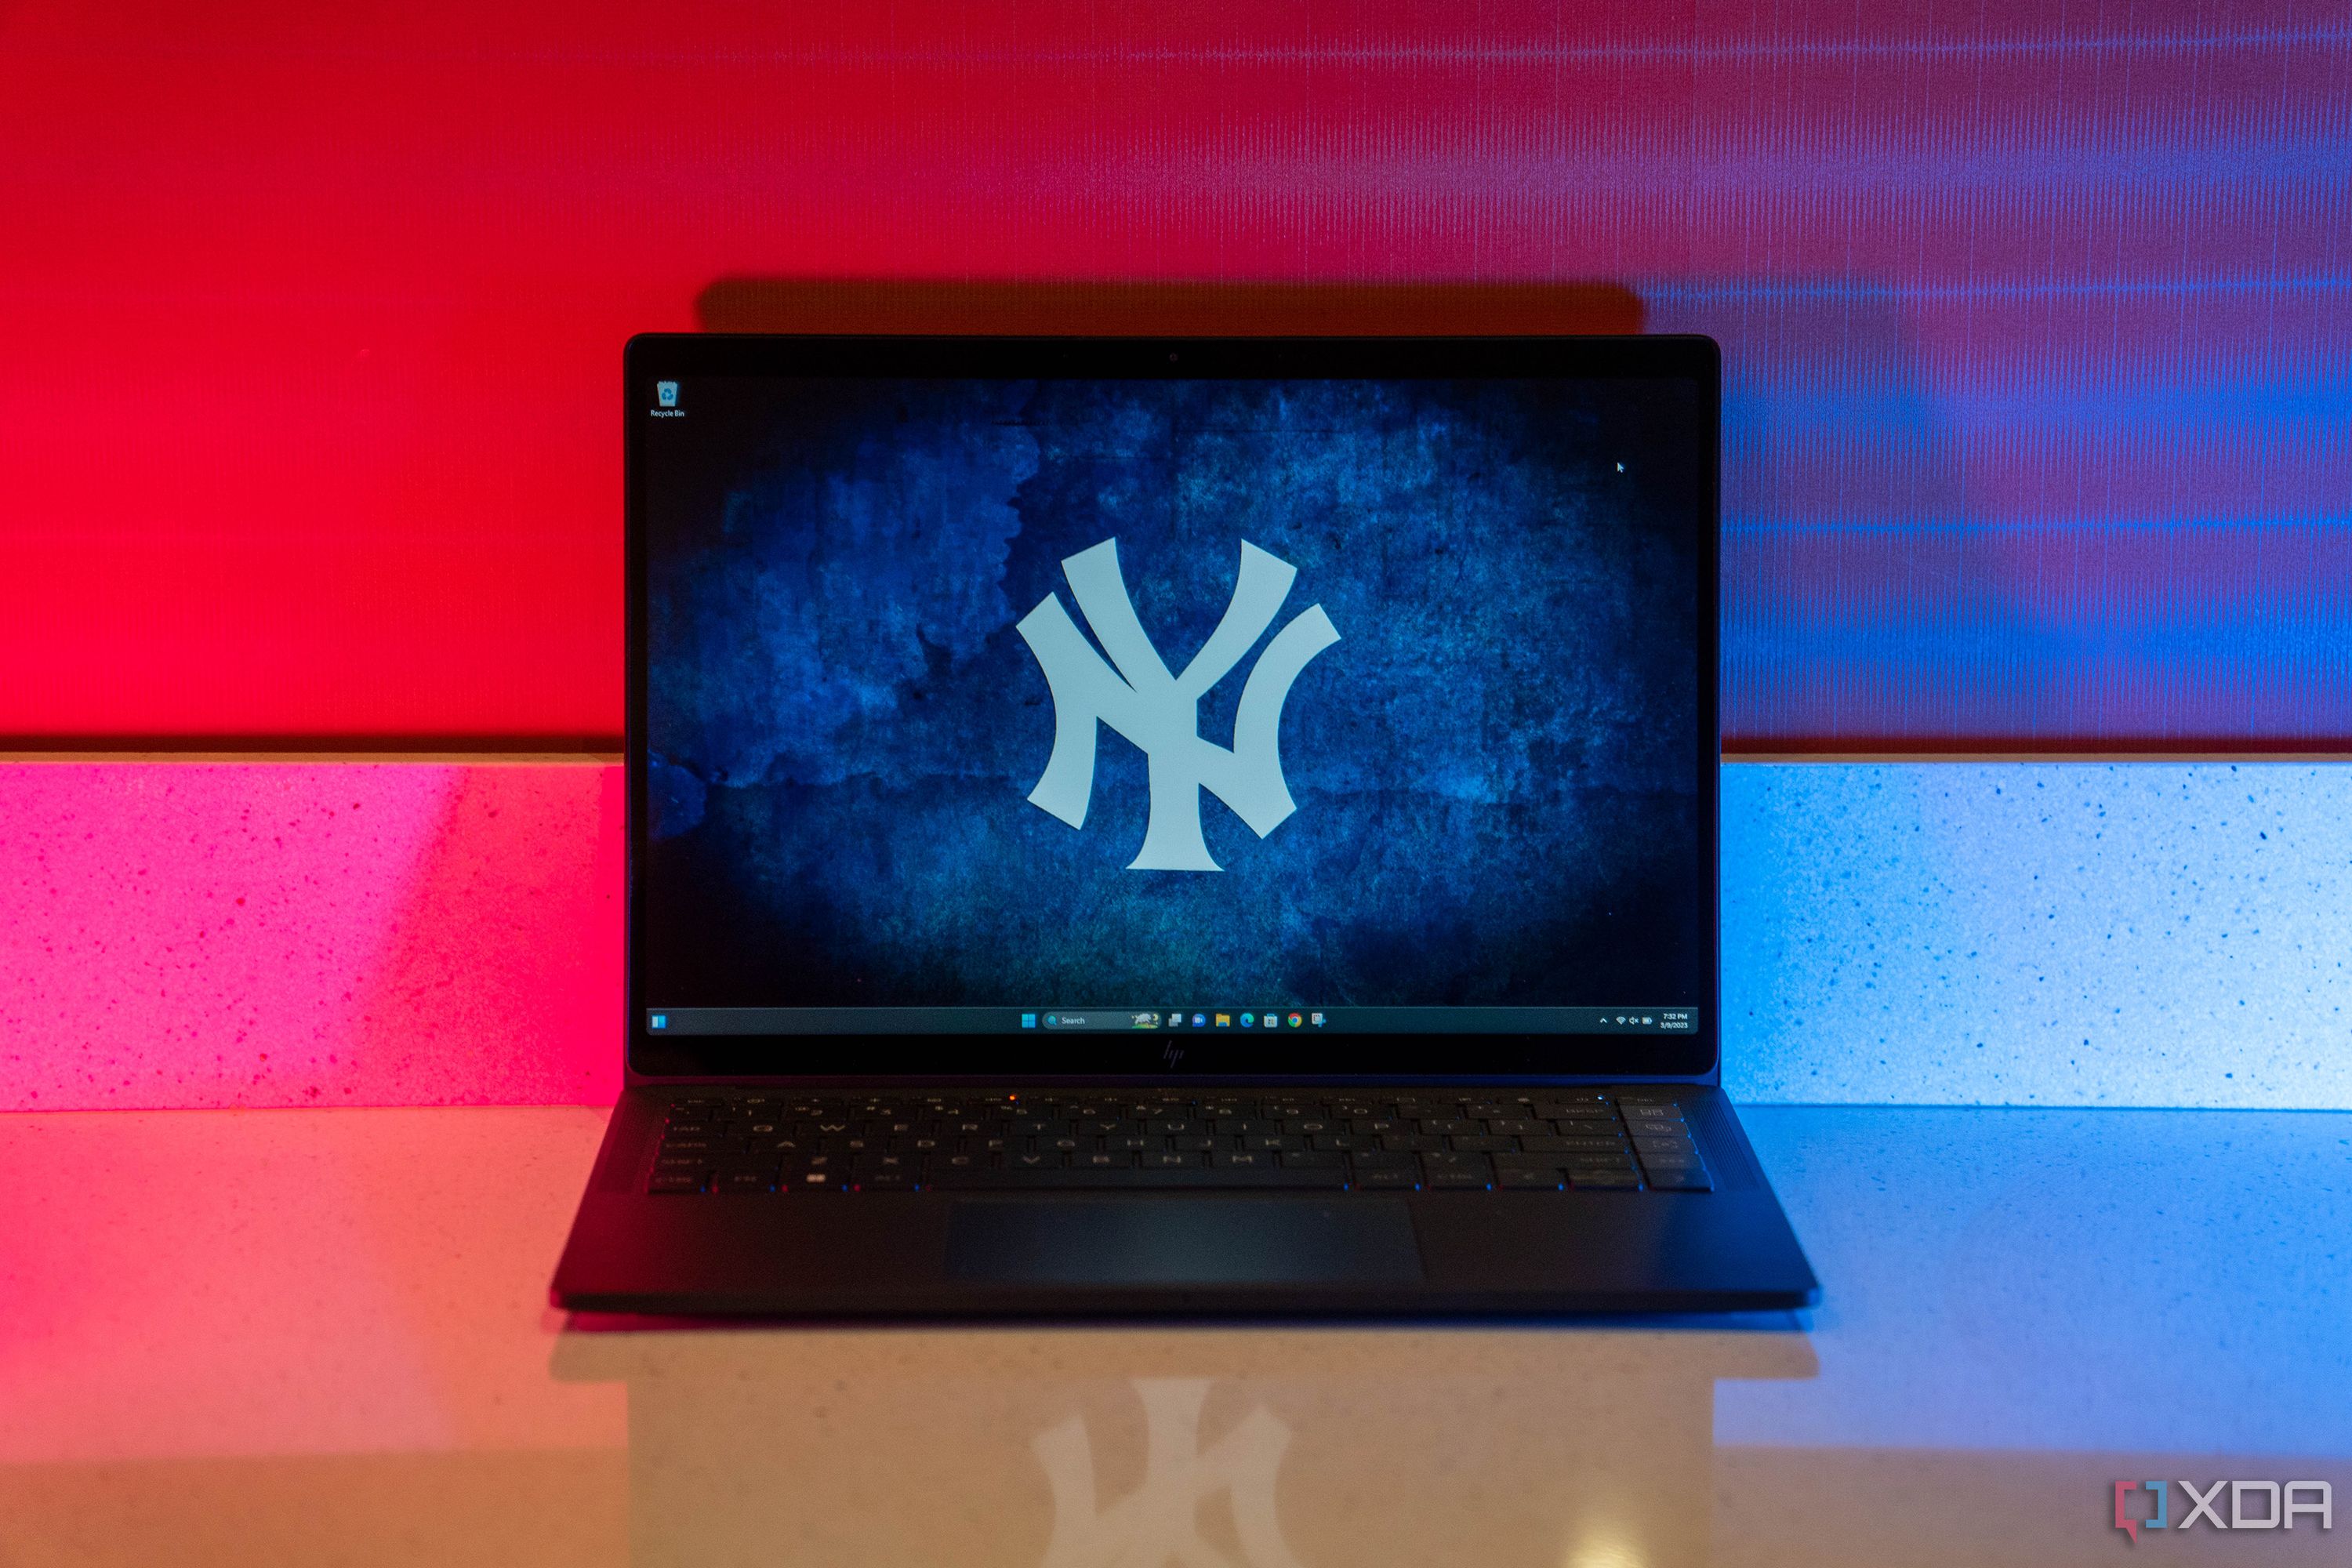 Black laptop with Yankee logo wallpaper, with blue and magenta lighting.